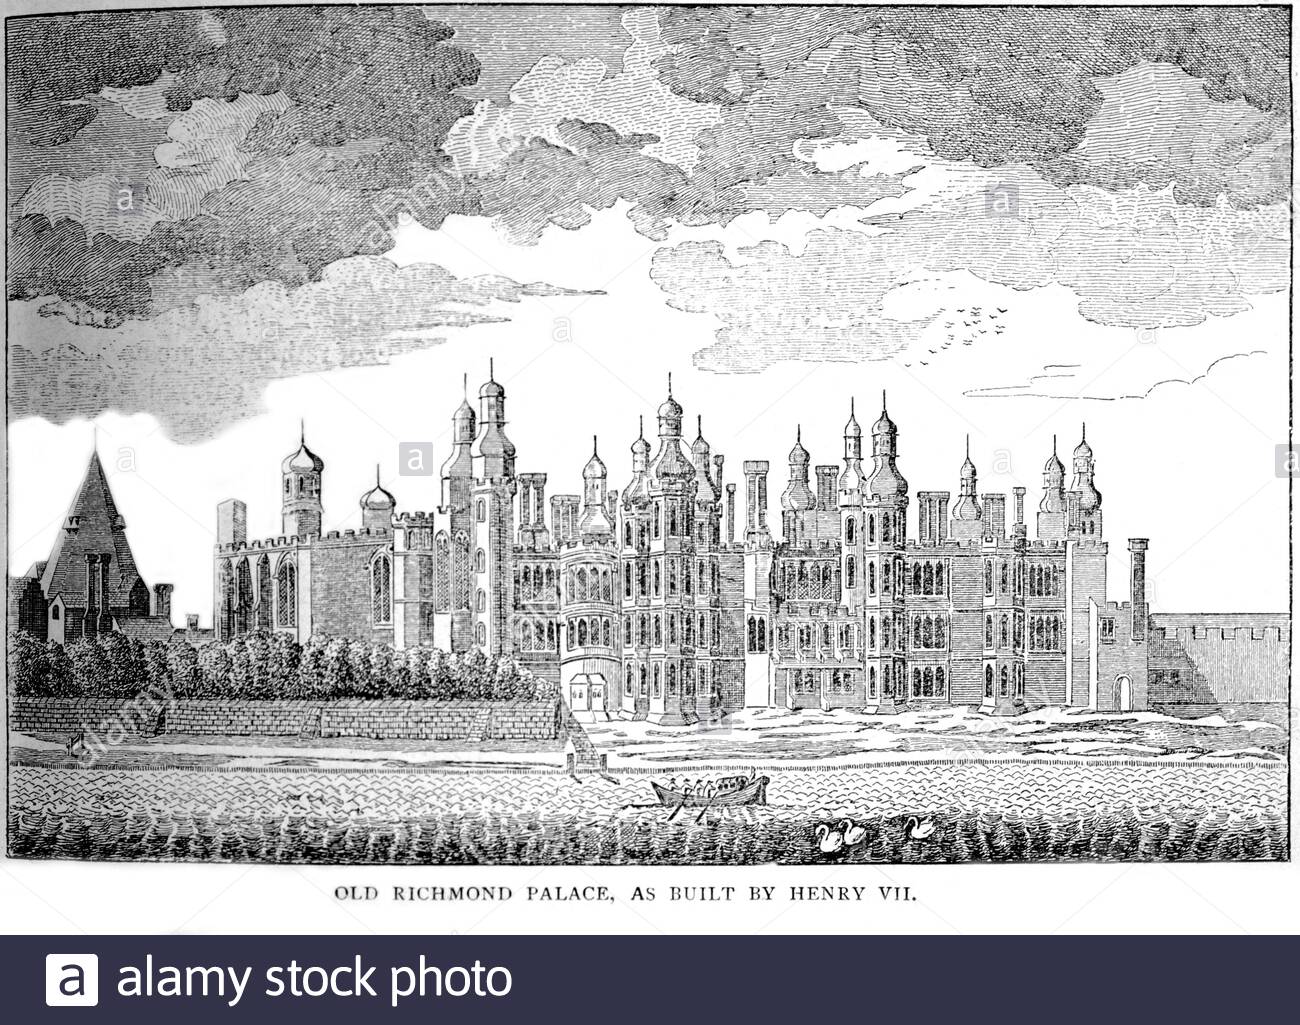 View of the Old Richmond Palace, as built by Henry VII on the site of the former Palace of Shene in 1497, vintage illustration from 1886 Stock Photo